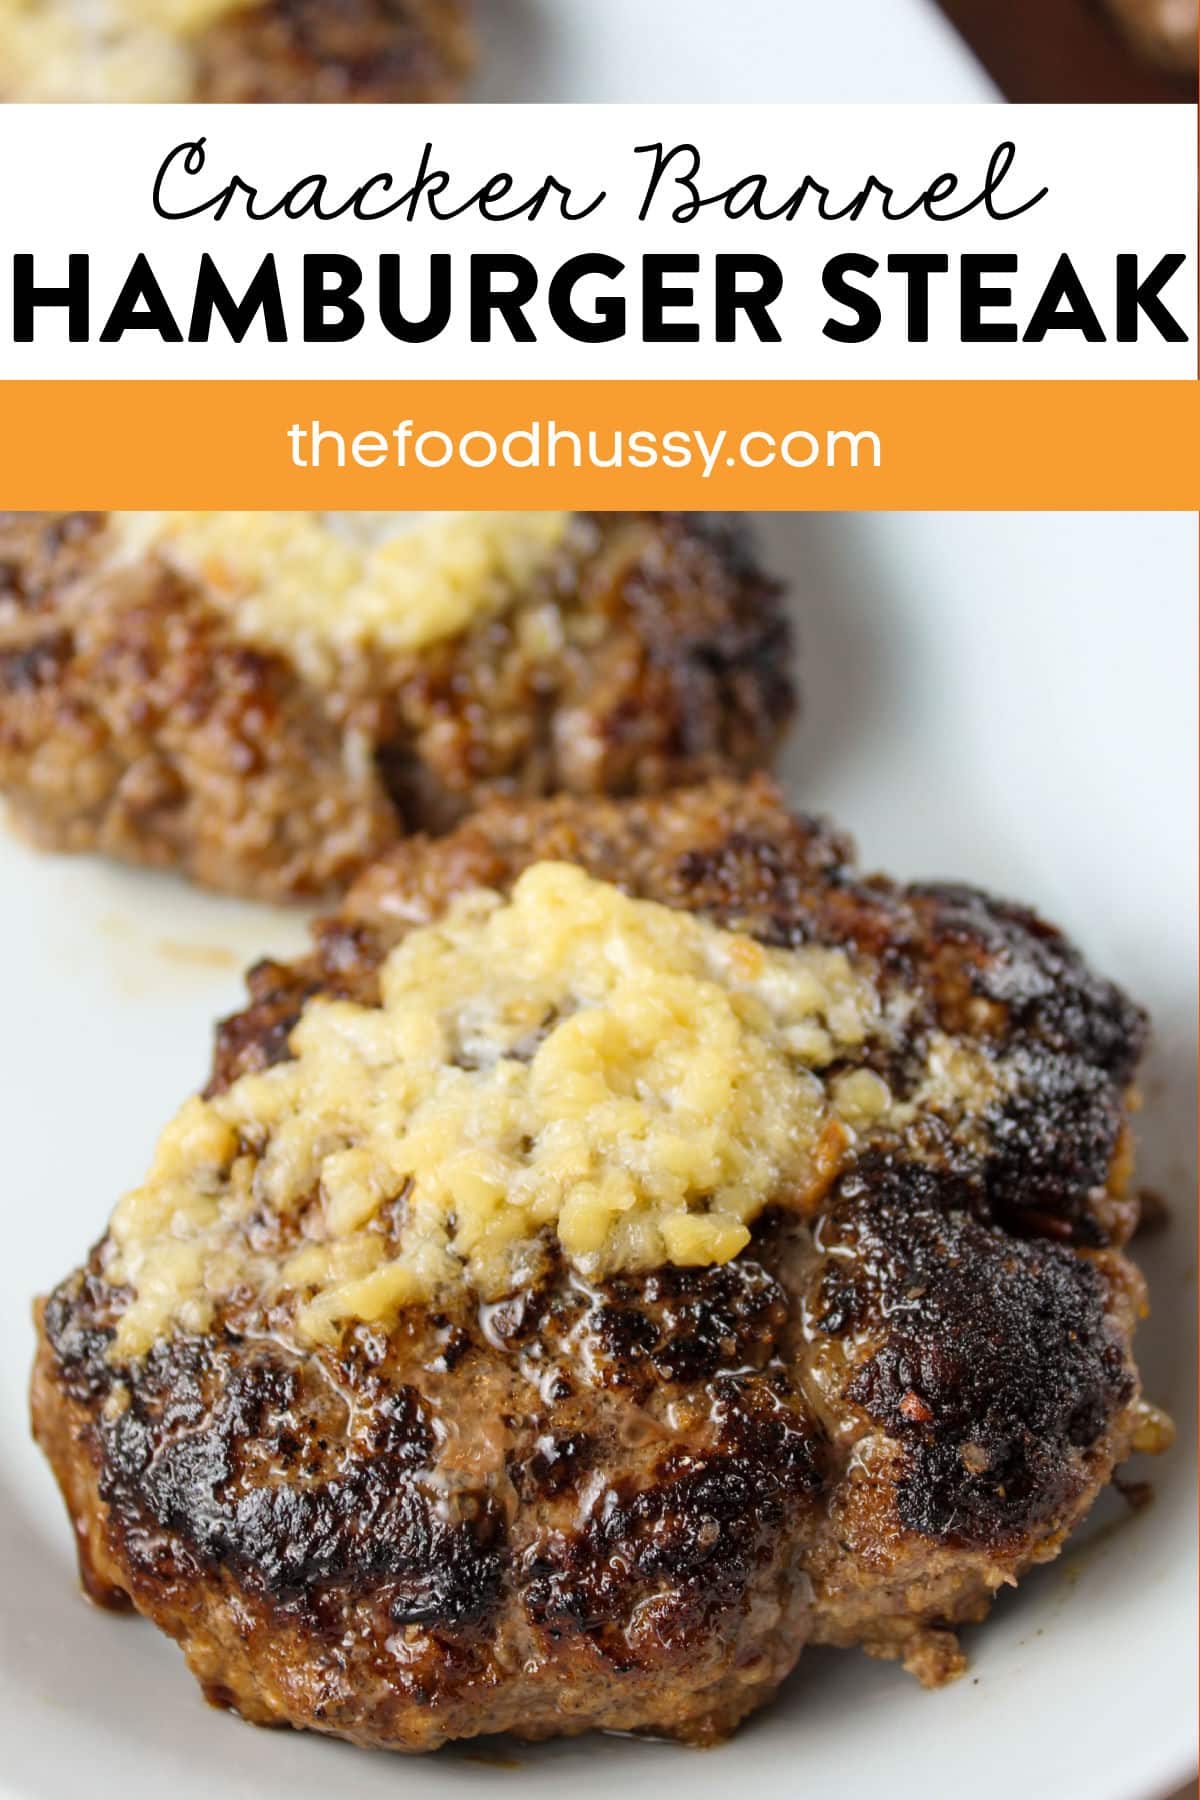 Cracker Barrel Hamburger Steak is a delicious down-home comfort food dish. Half-pound hamburger steak topped with a decadent garlic butter sauce! This is easy and delicious.  via @foodhussy